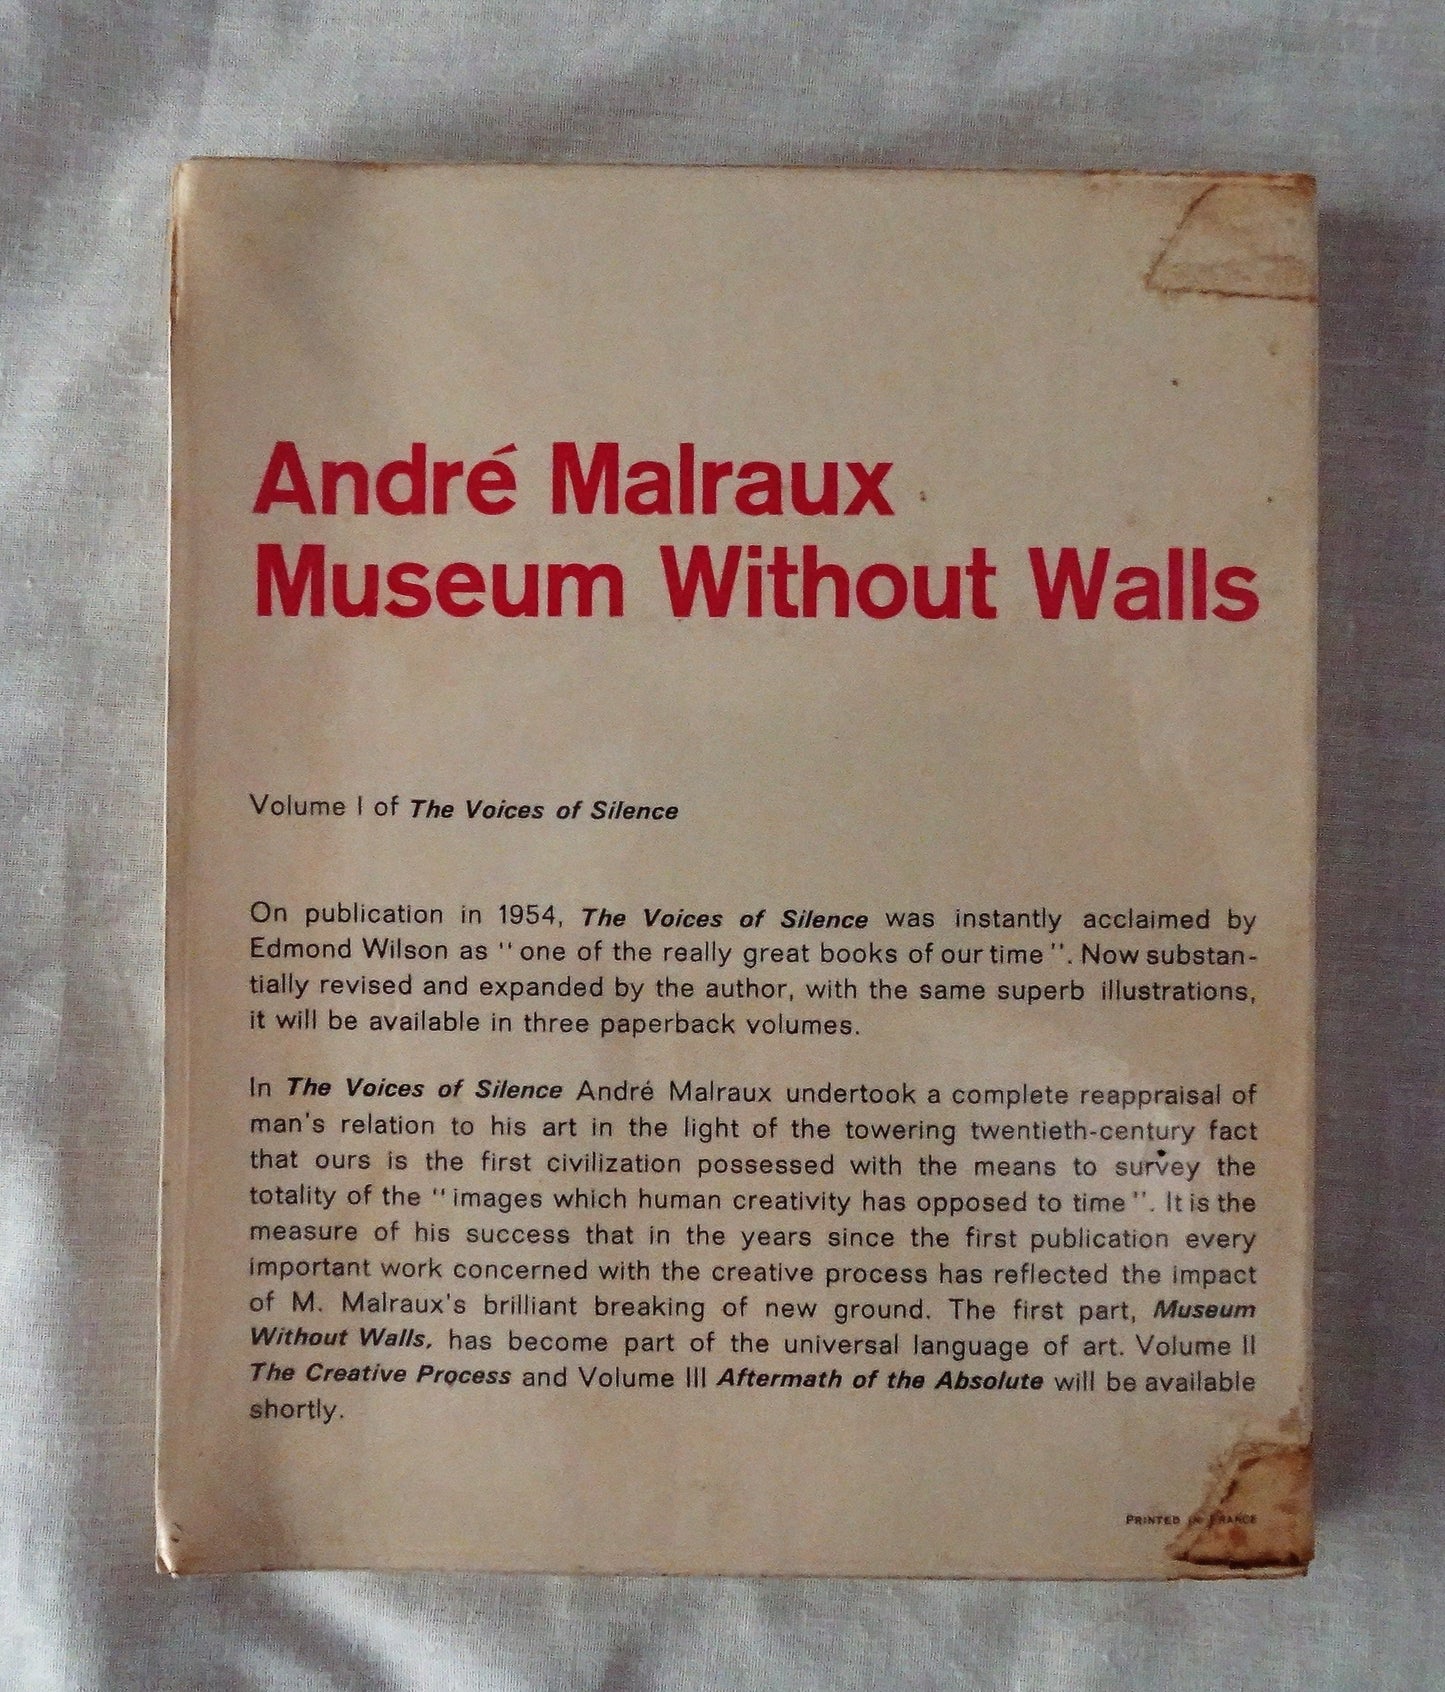 Museum Without Walls by Andre Malraux